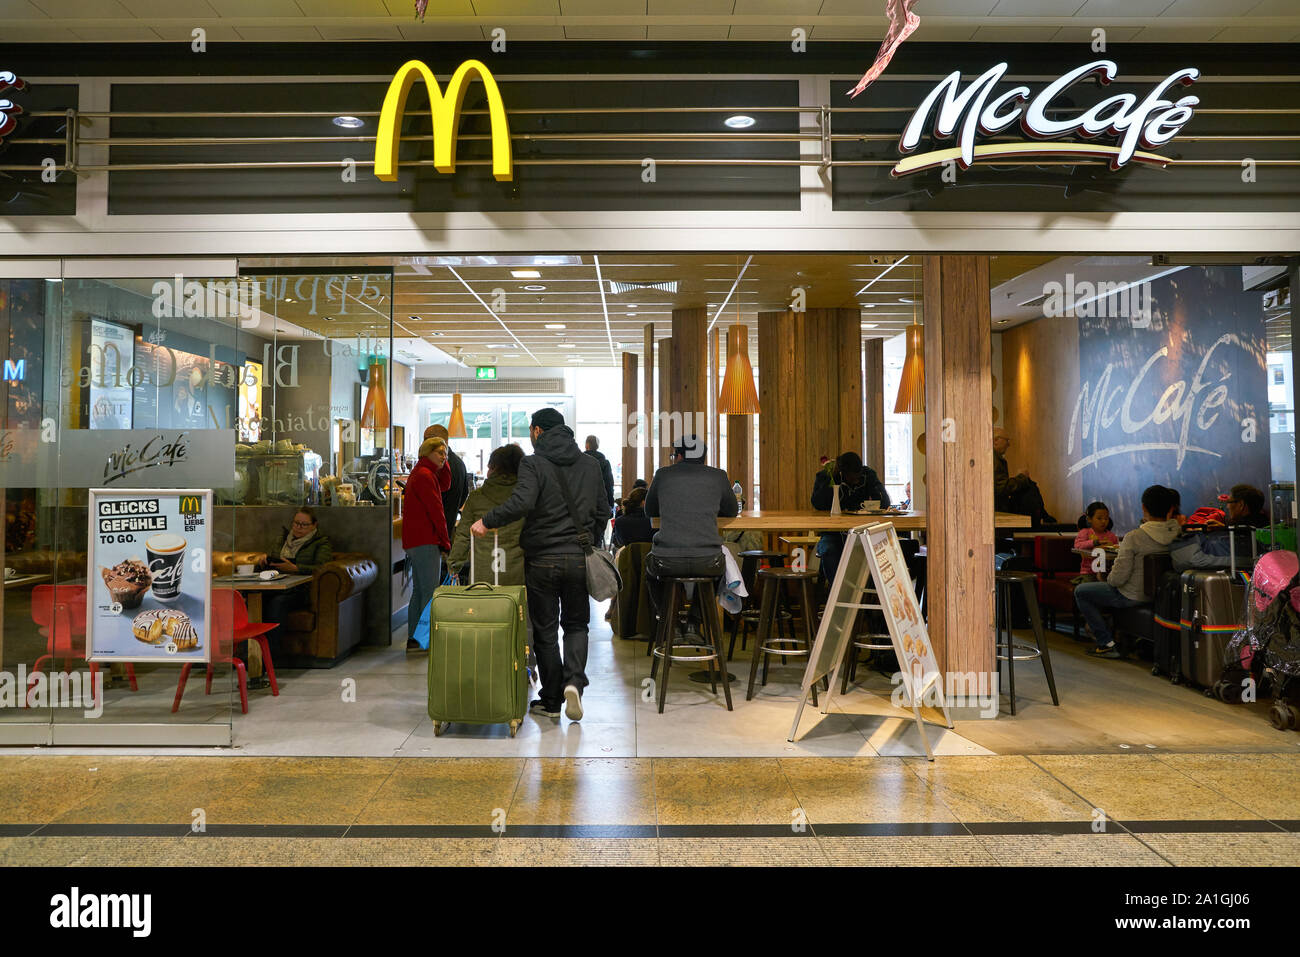 COLOGNE, GERMANY - CIRCA OCTOBER, 2018: Golden Arches and McCafe sign over McDonald's restaurant entrance in Cologne. Stock Photo